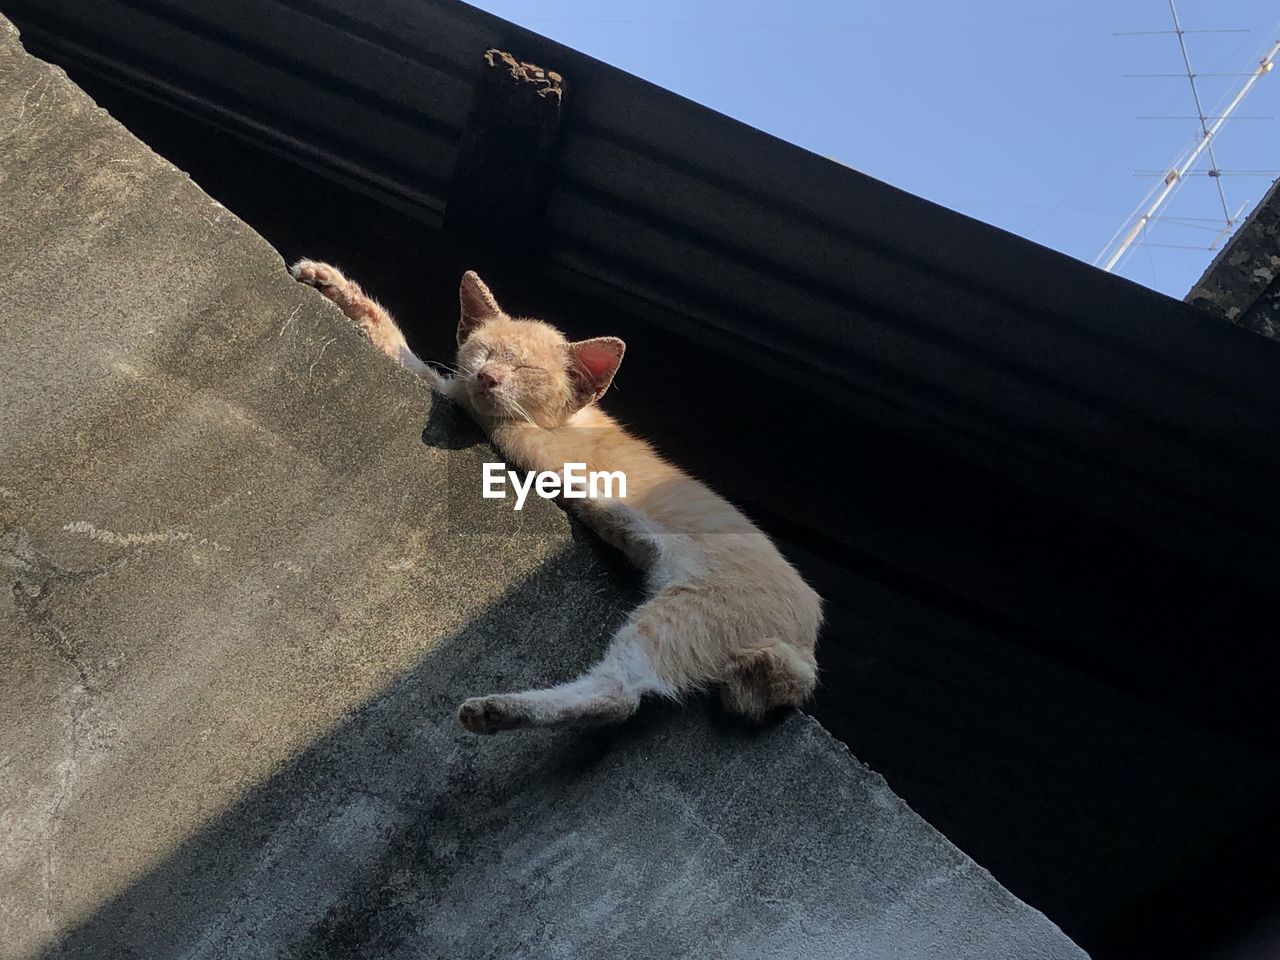 HIGH ANGLE VIEW OF A CAT